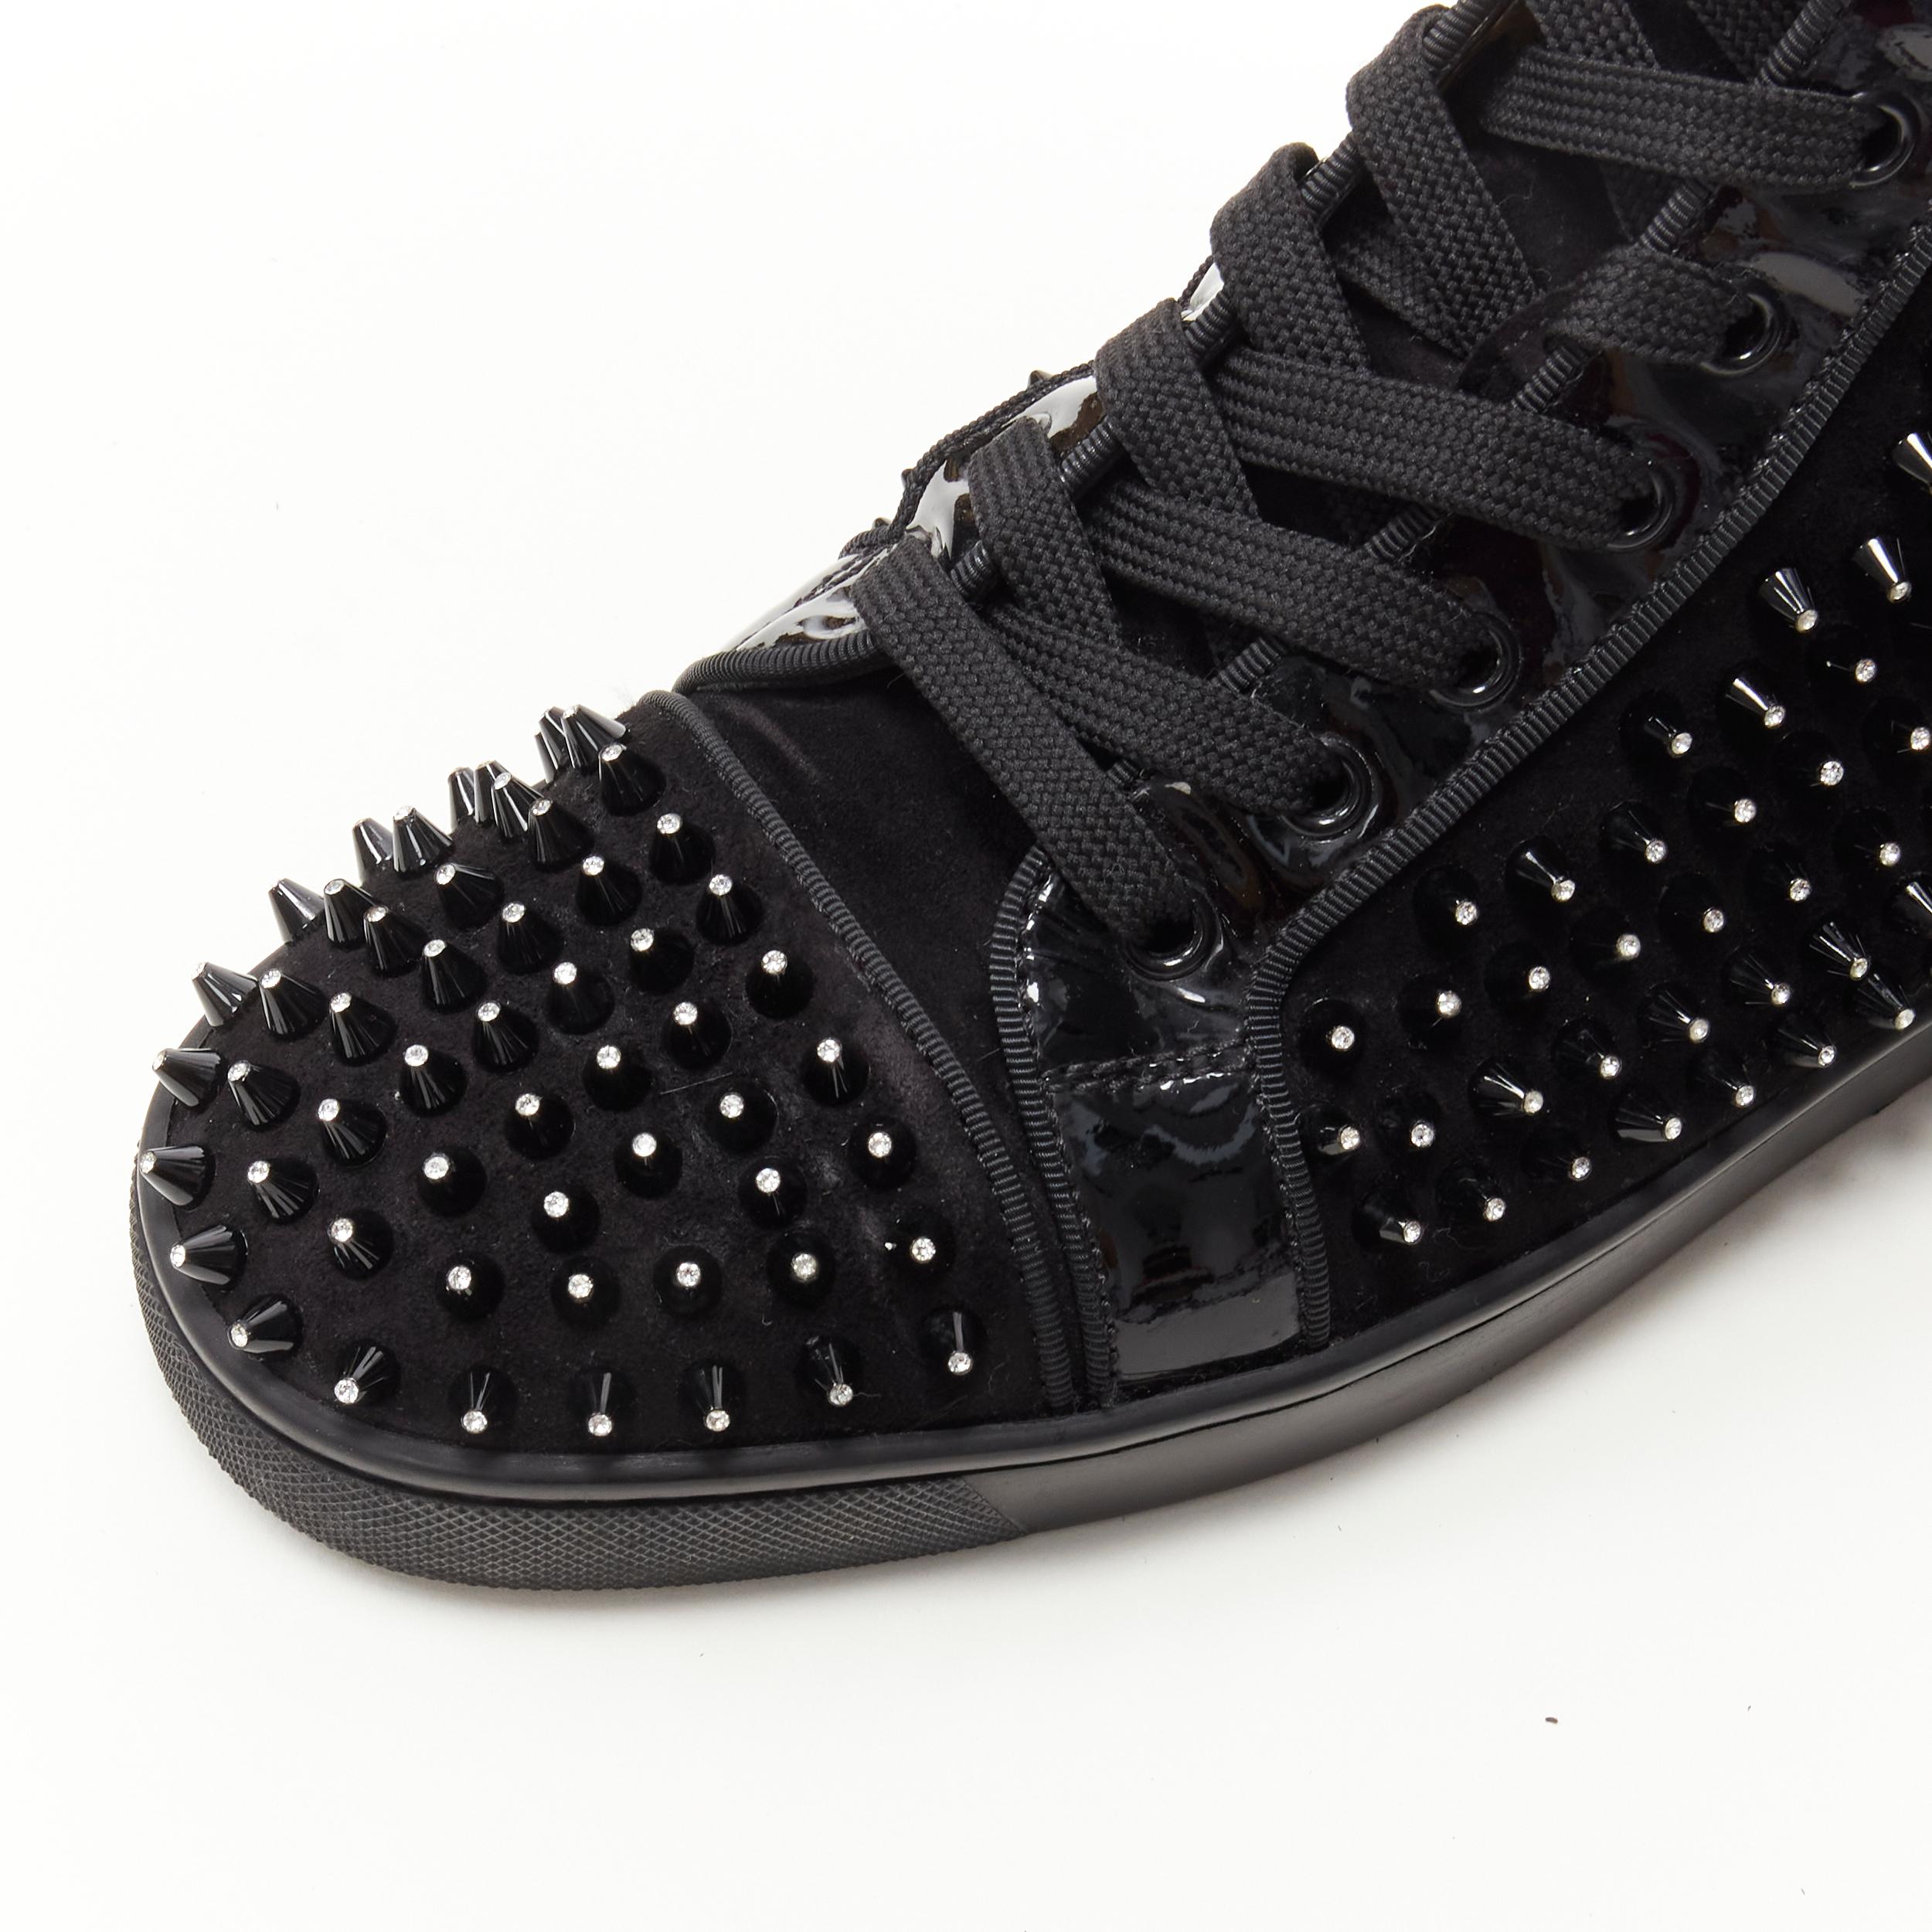 CHRISTIAN LOUBOUTIN Louis black velvet patent crystal spike stud sneaker EU41 In Excellent Condition For Sale In Hong Kong, NT